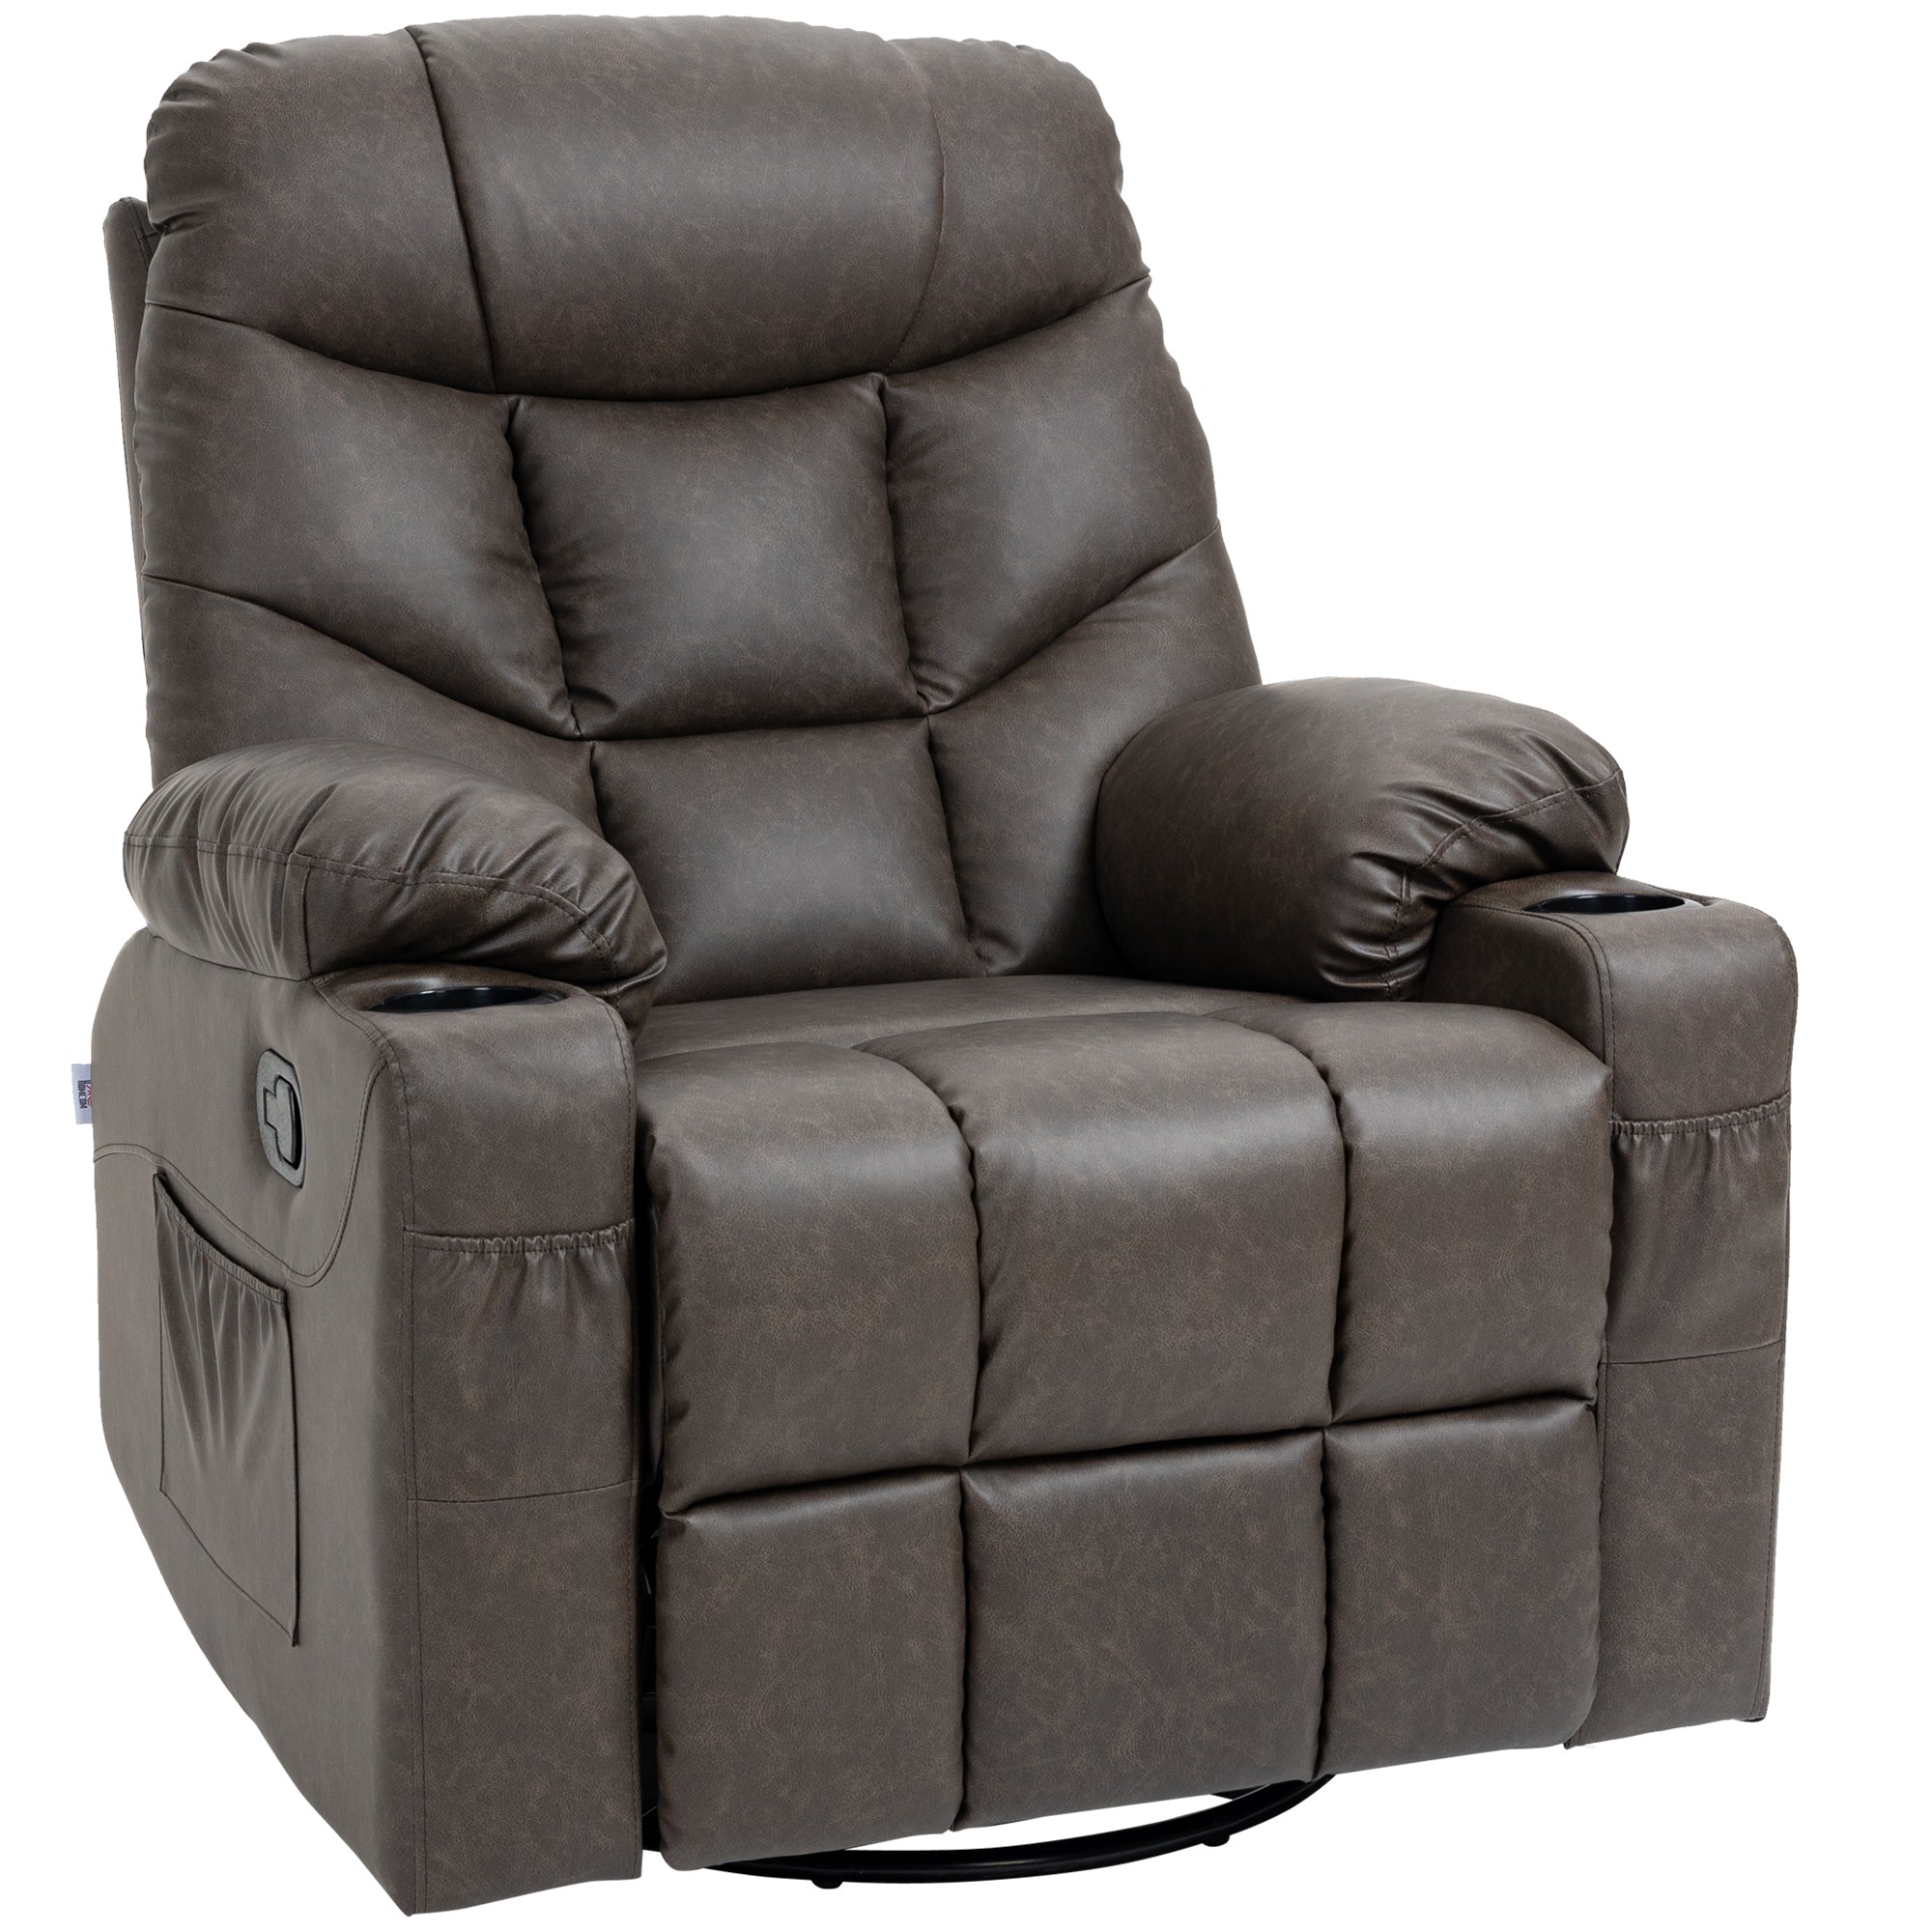 HOMCOM Manual Recliner Chair with Footrest - Cup Holder - Swivel Base - Brown  | TJ Hughes